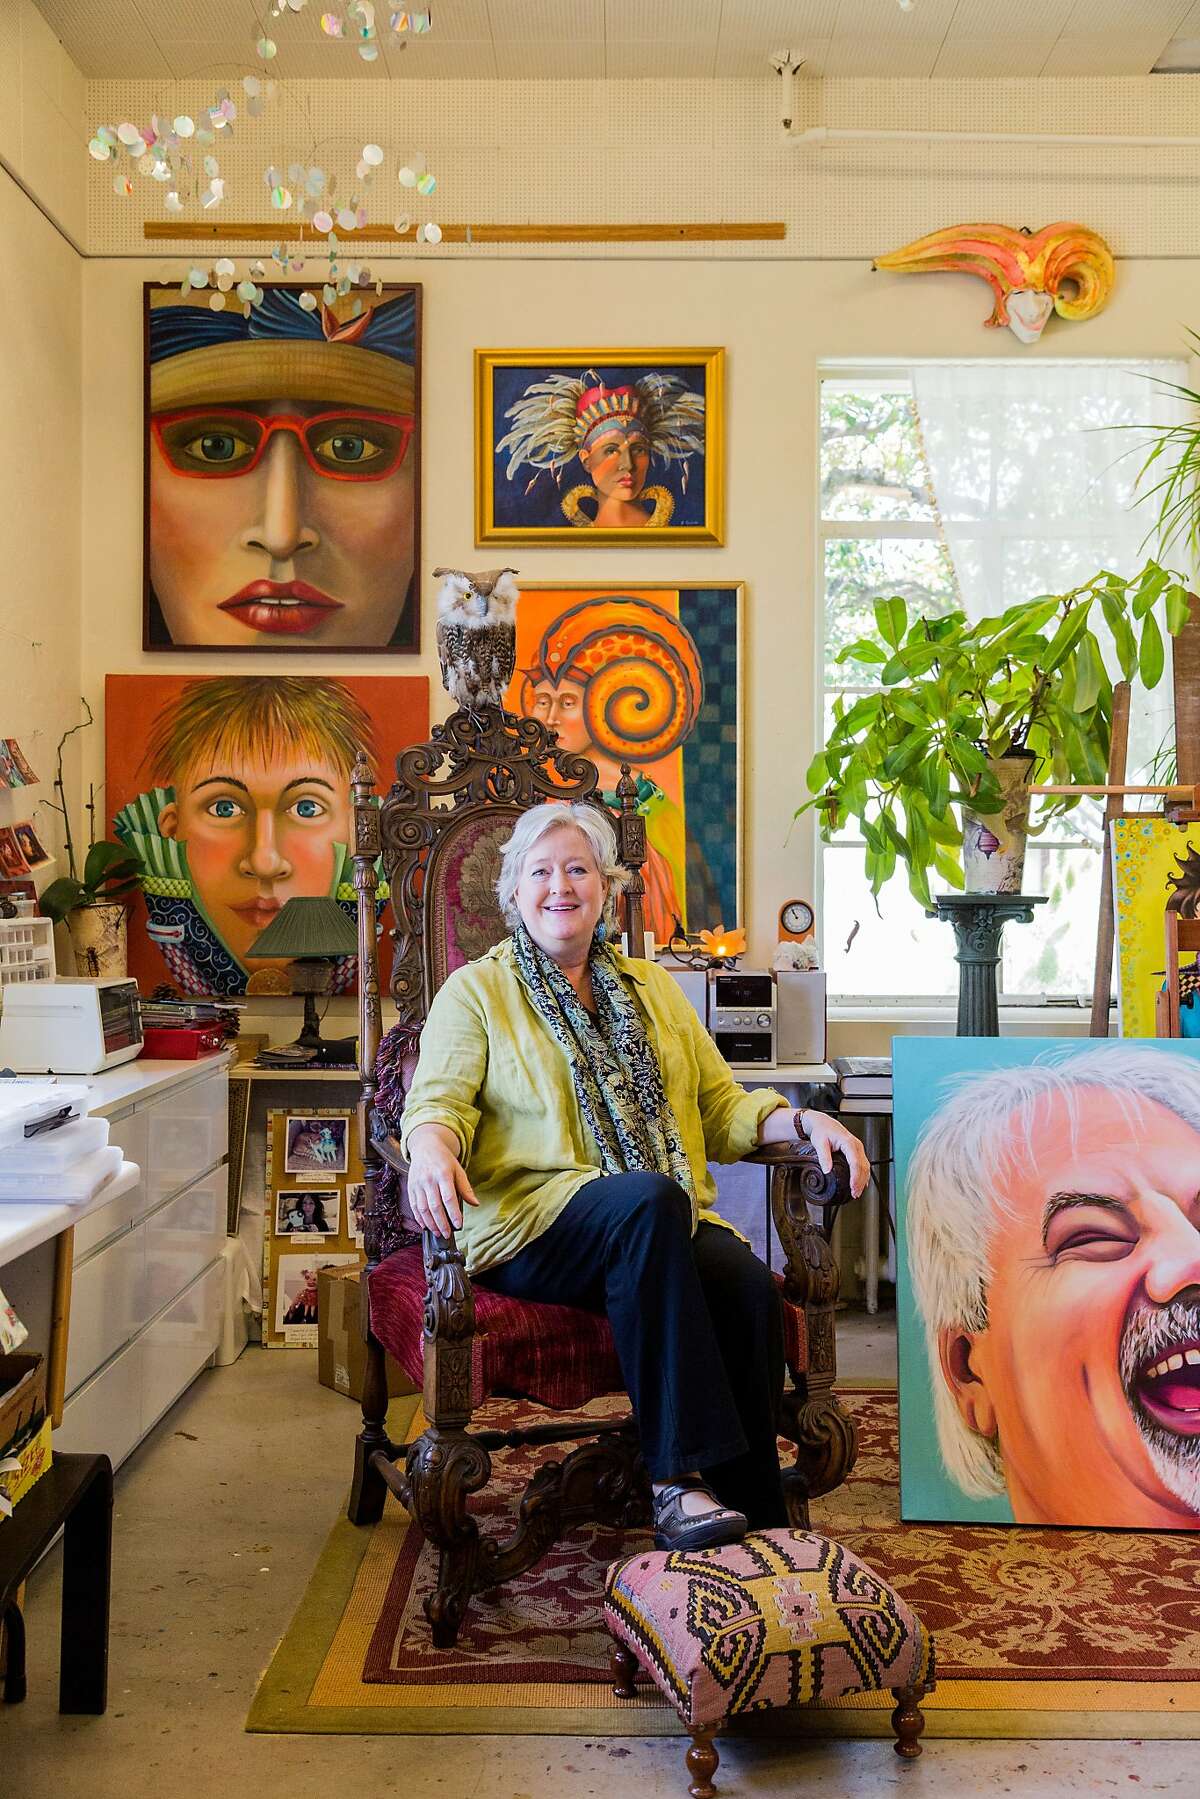 Painter Jill Culver, who specializes in soul portraits of people where the less she knows about them the better, in her studio located at the Marin Museum of Contemporary Art, which hosts open studios the first Sunday of the month in Novato, Calif., Wednesday, May 20, 2015.